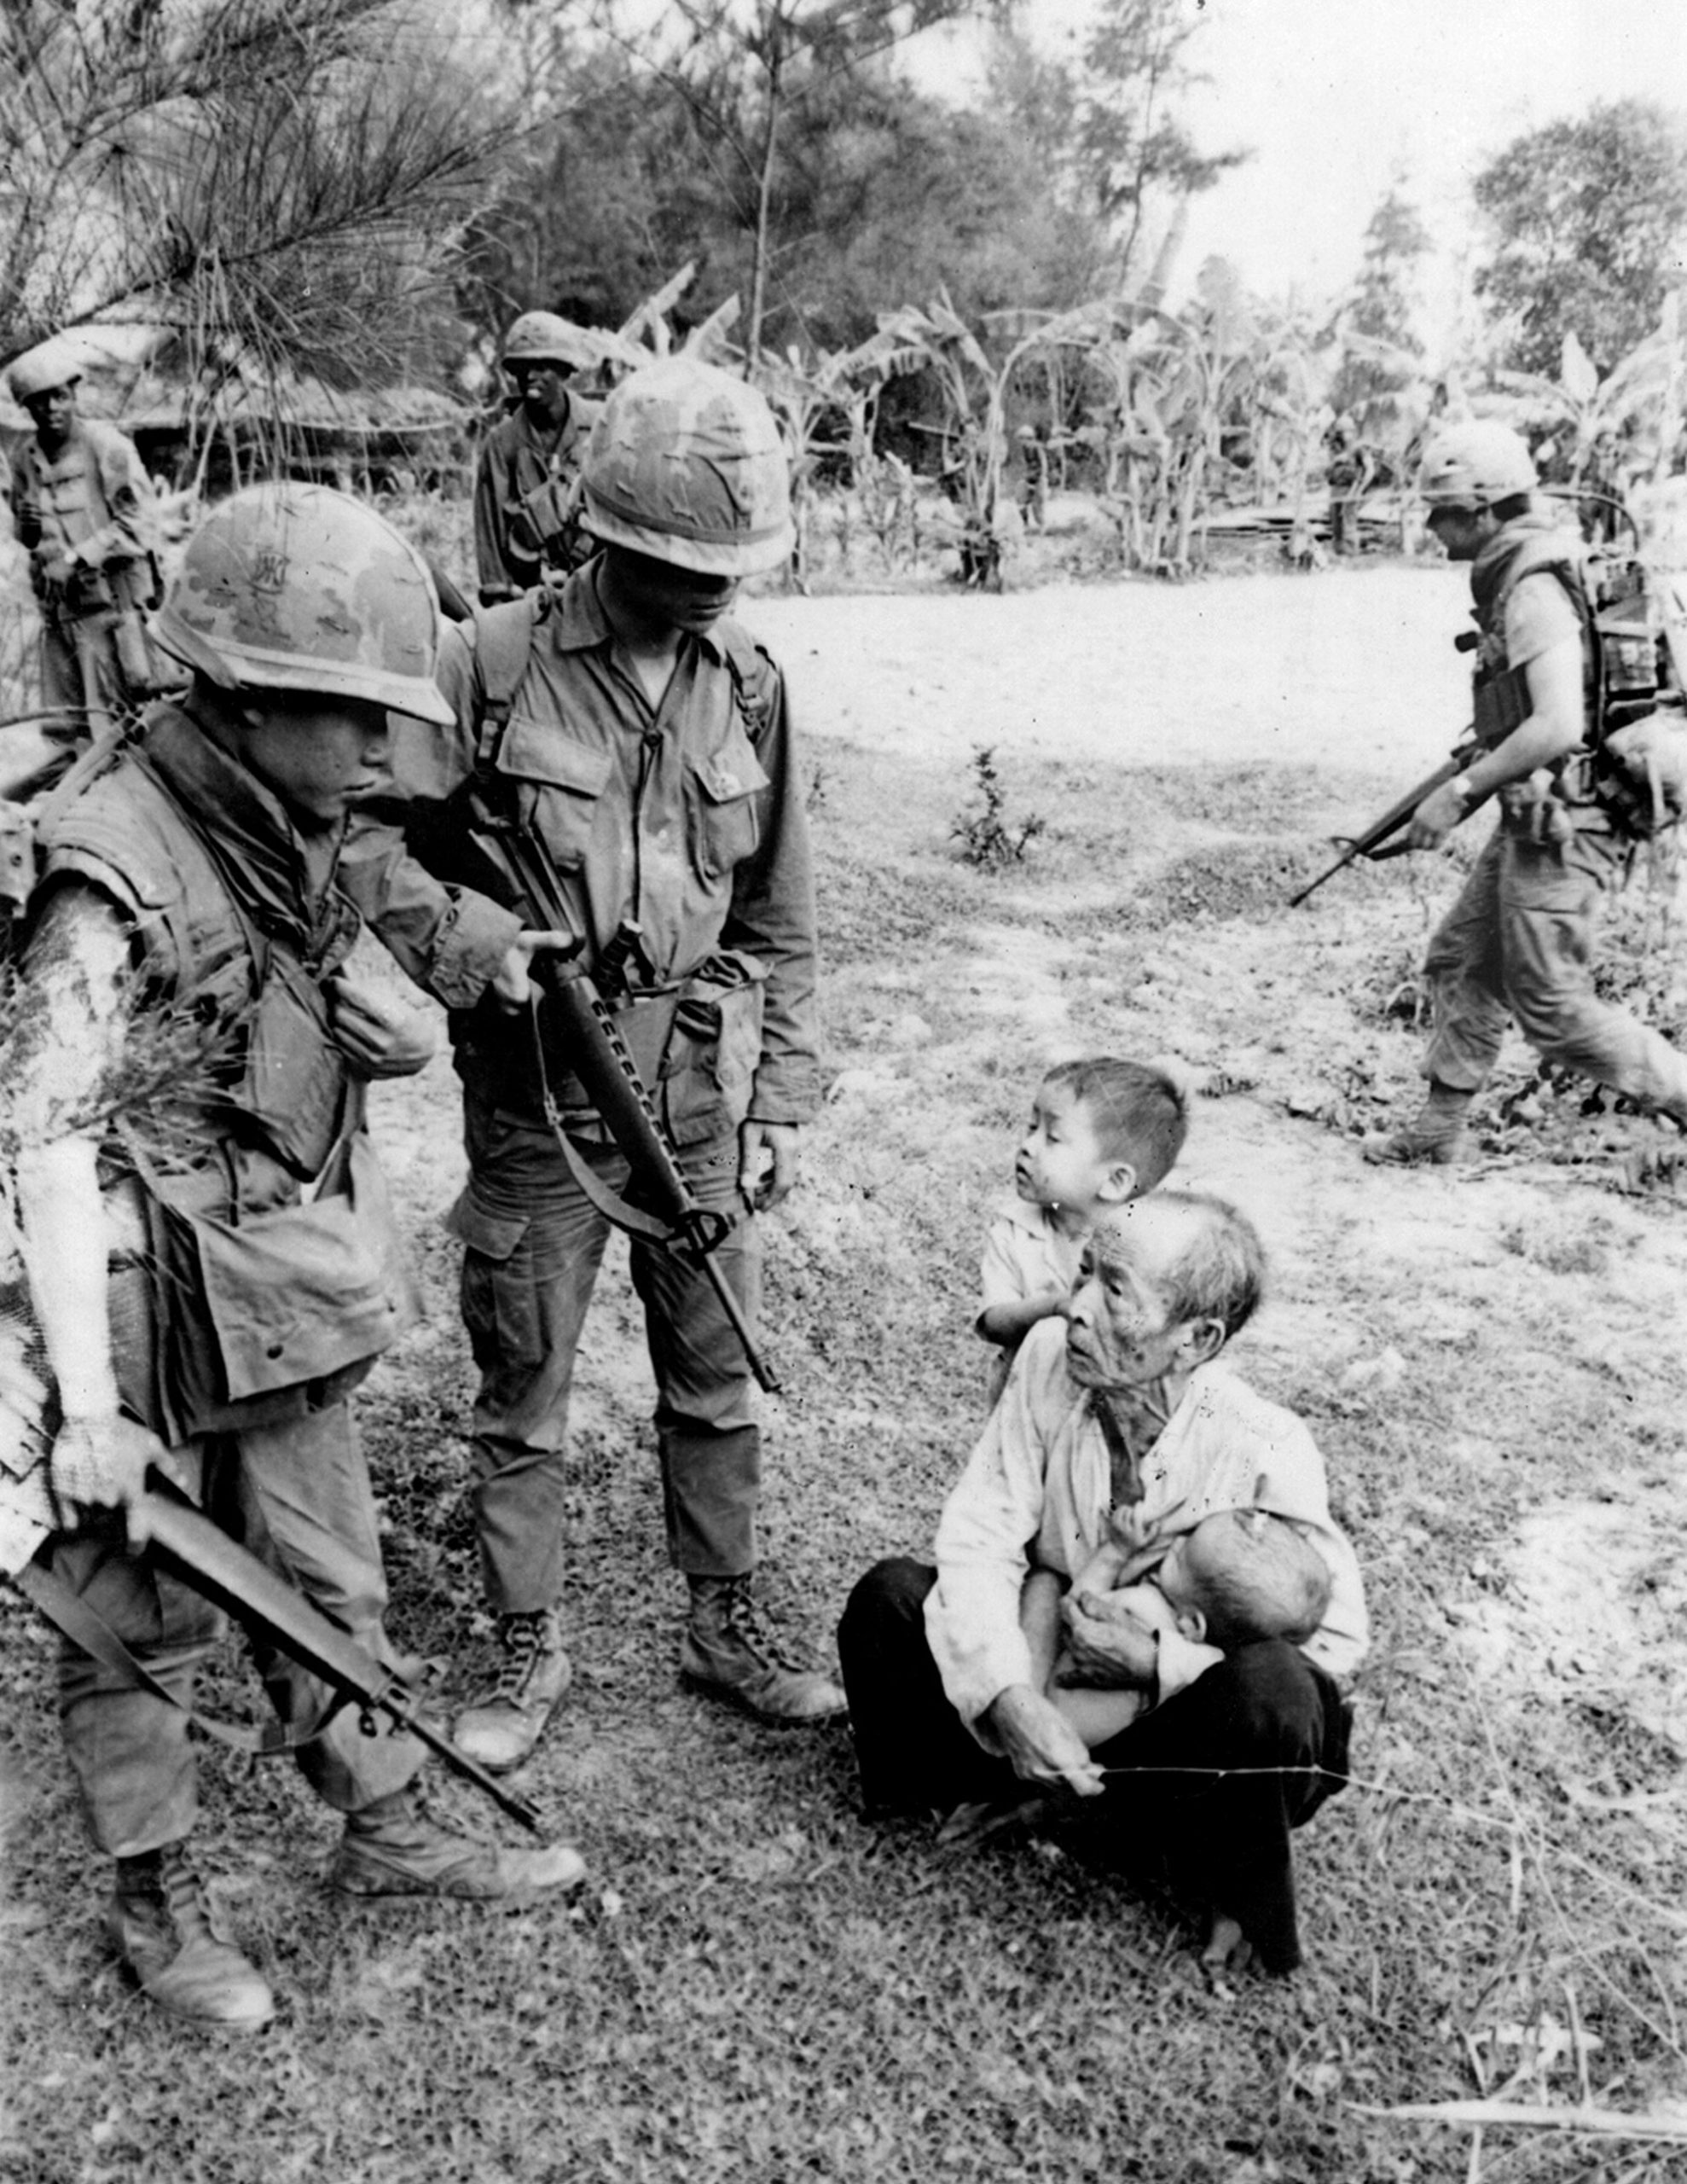 Murder at My Lai — Who Exactly Was Responsible for America’s Most Infamous War Crime?